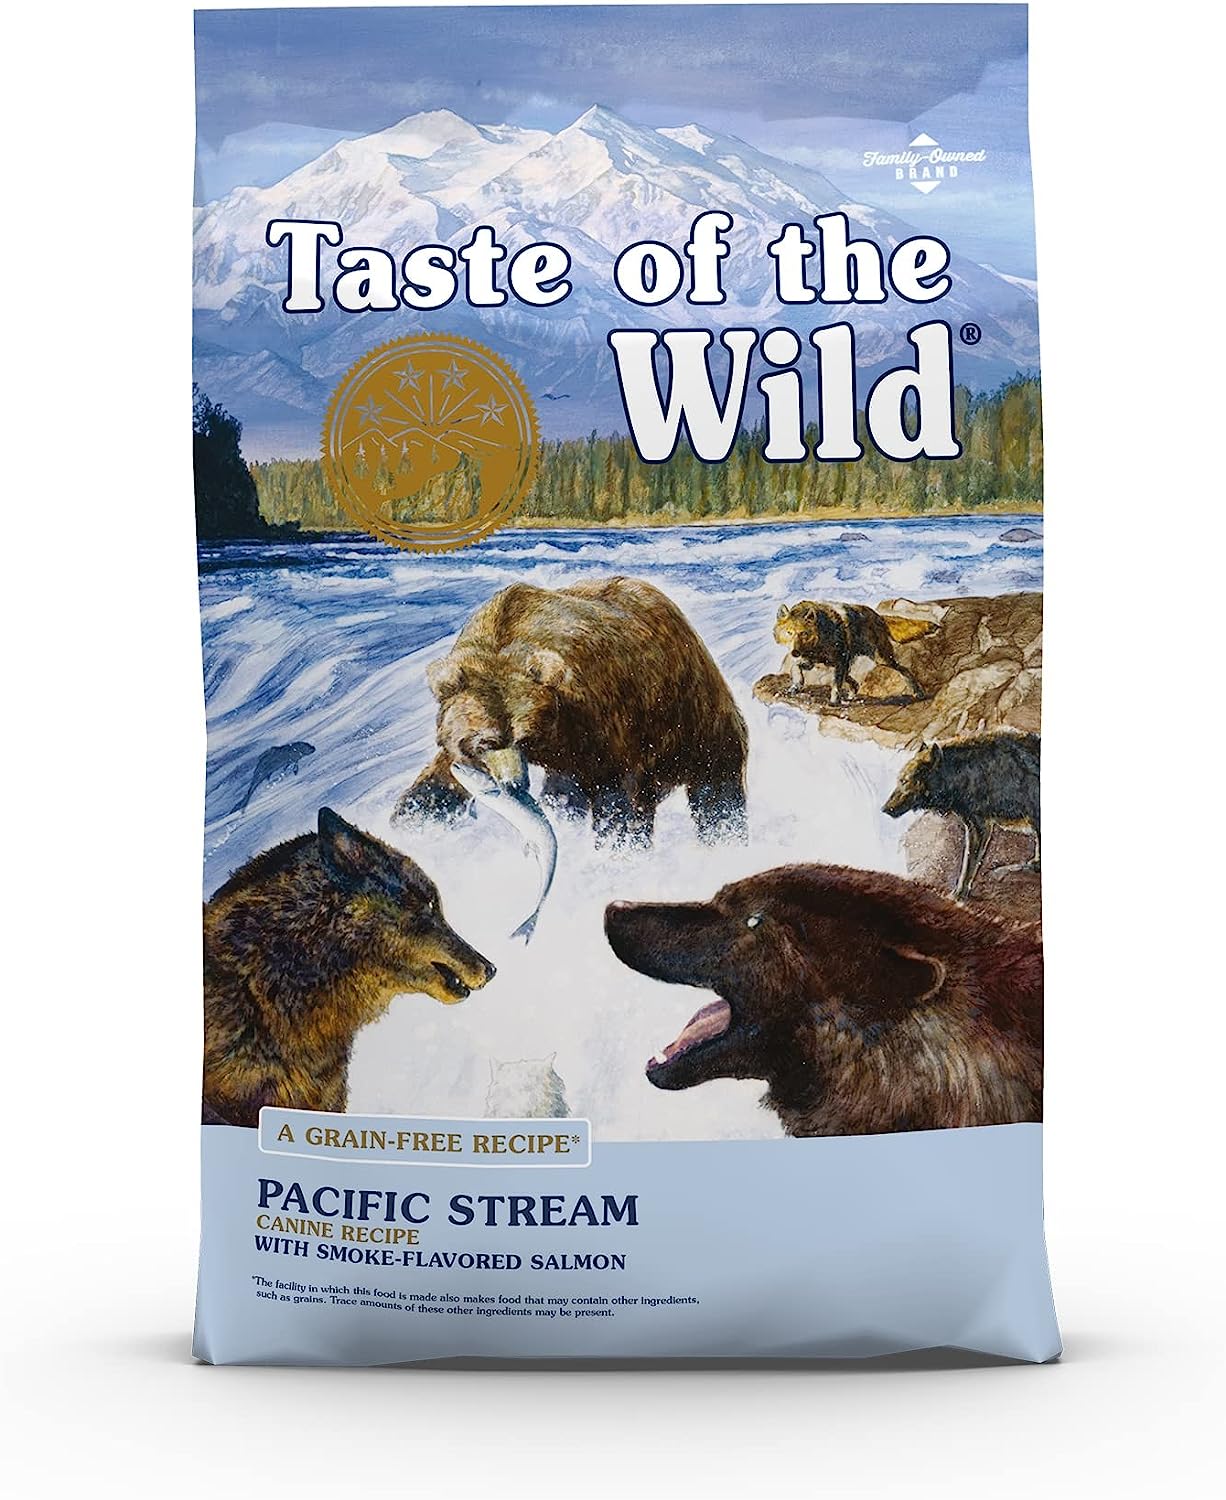 Taste of the Wild Pacific Stream Grain-Free Dry Dog Food with Smoke-Flavored Salmon